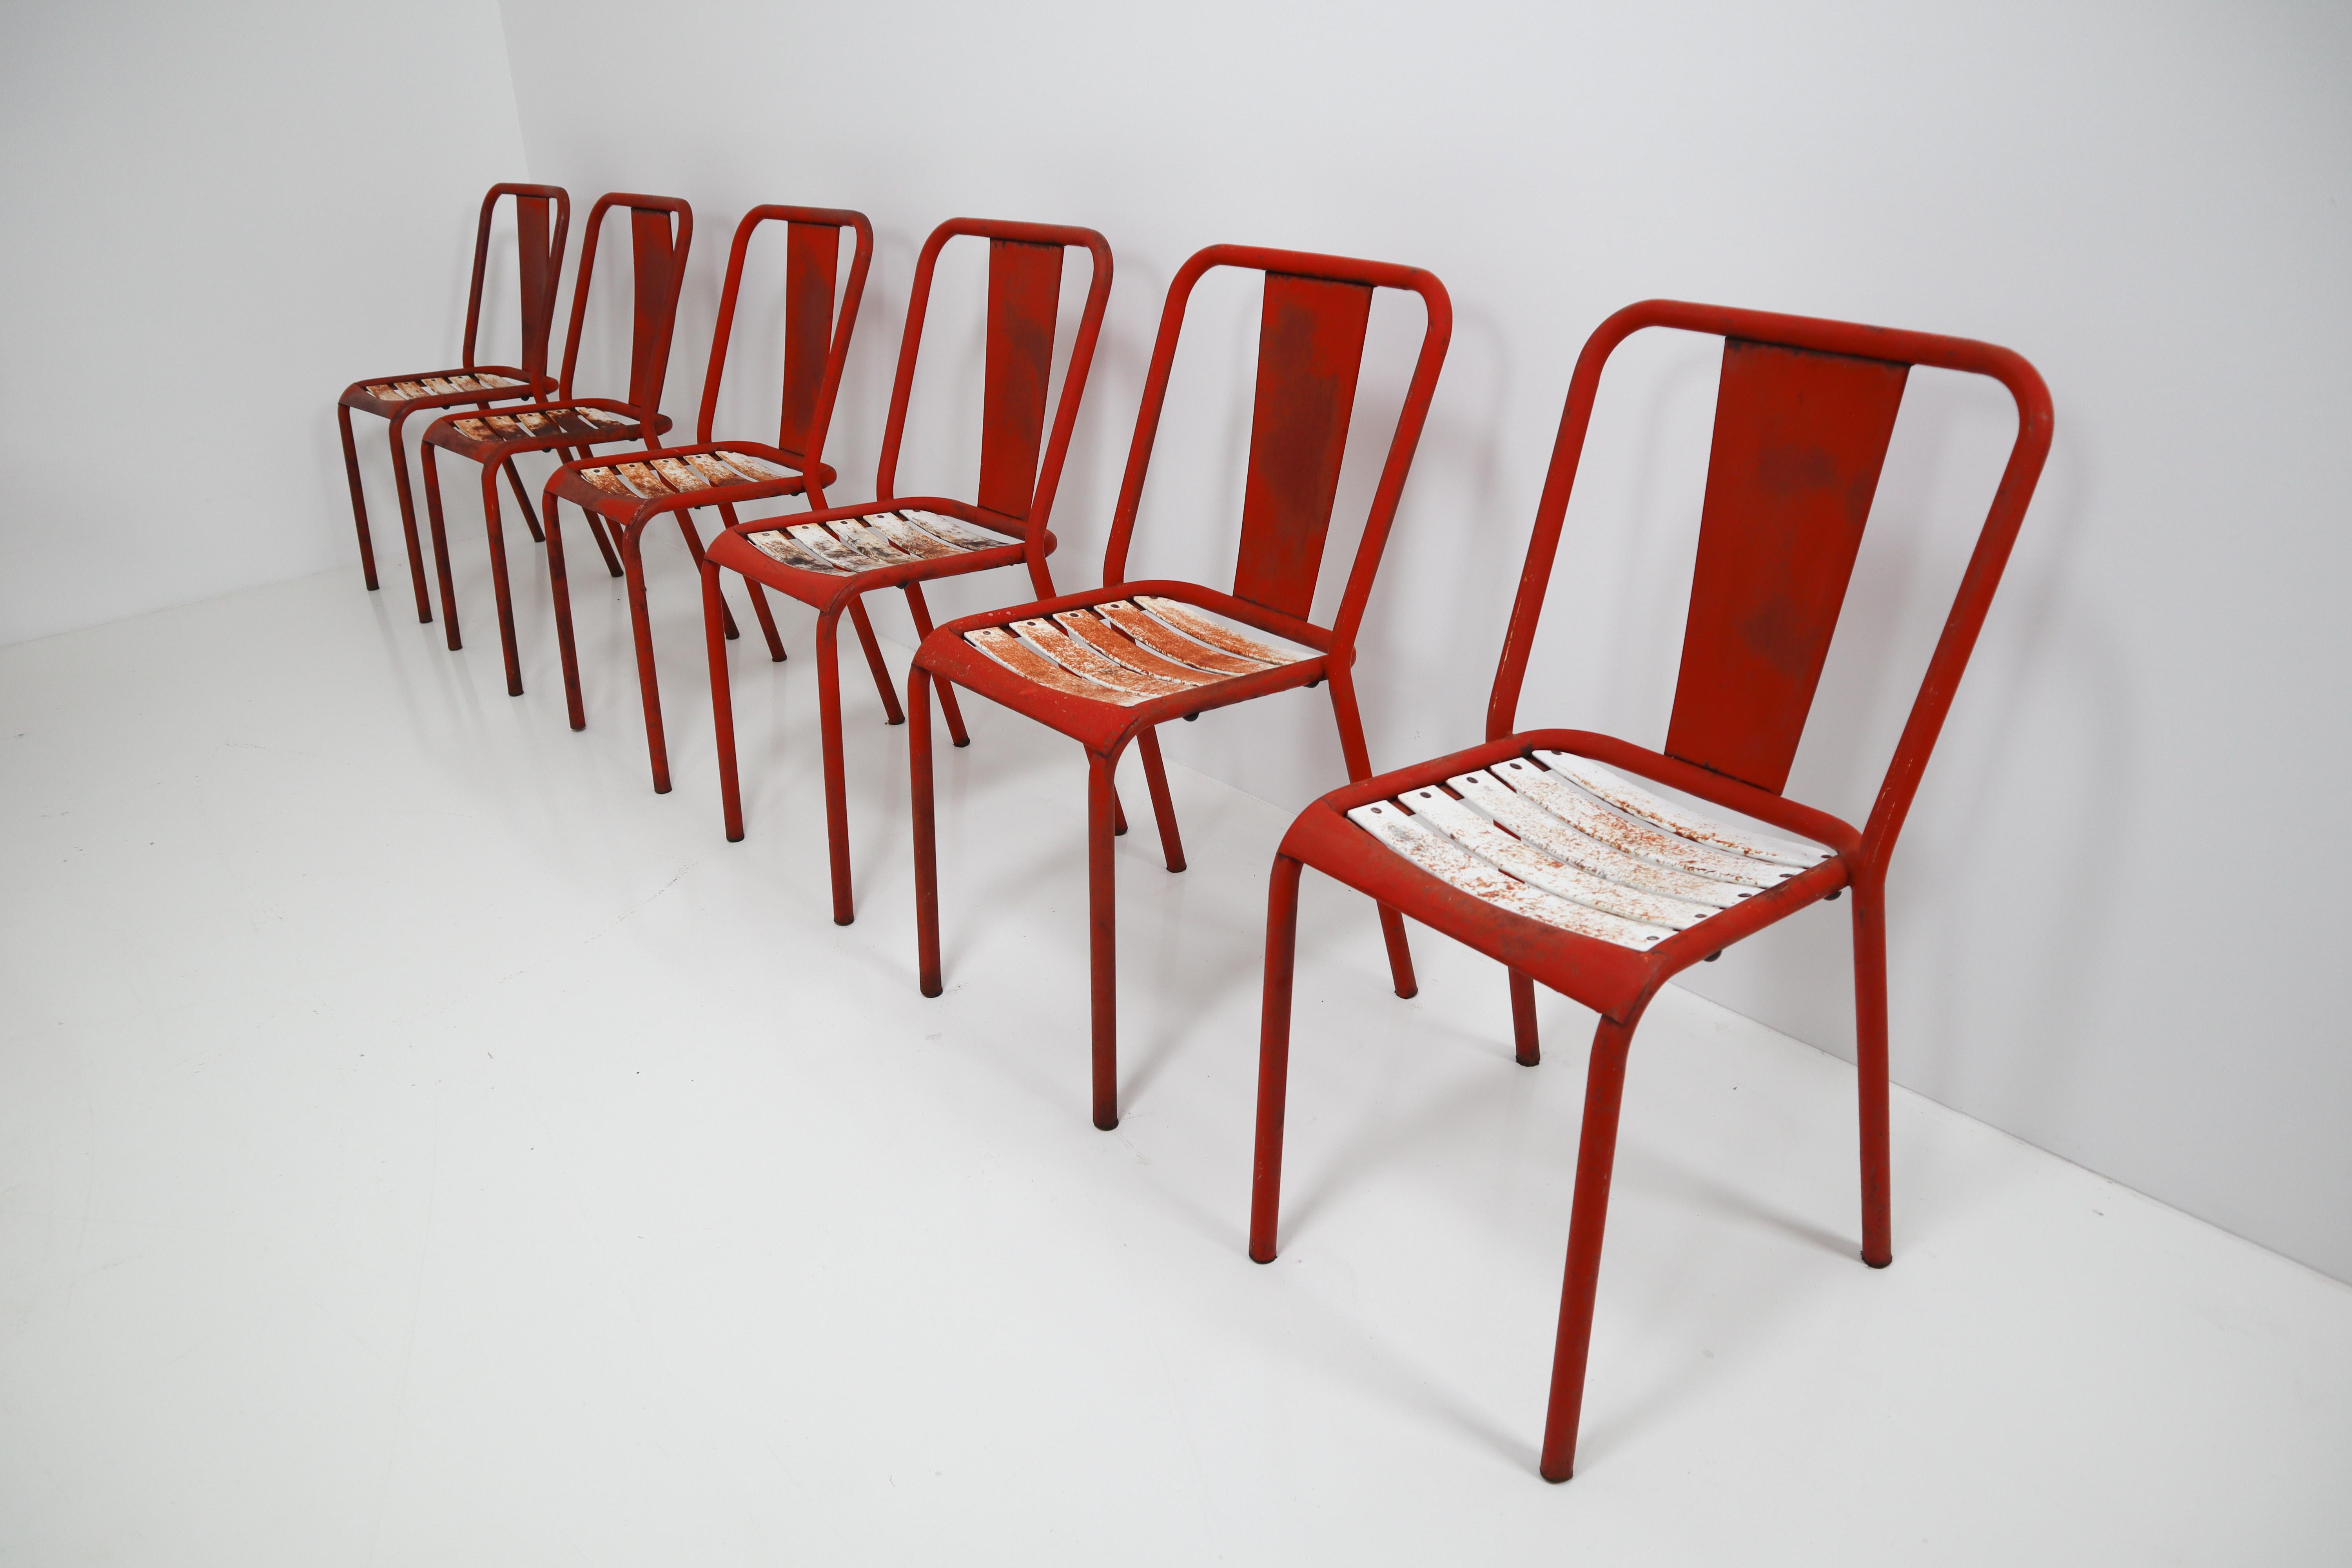 Tolix T4 metal chairs by designer Xavier Pauchard, in red with white color. A lot of patina. Probably from 1950, without certainty. Ideal for midcentury, industrial decoration. Measures: Seat height 45 cm. 

The French company Tolix was founded